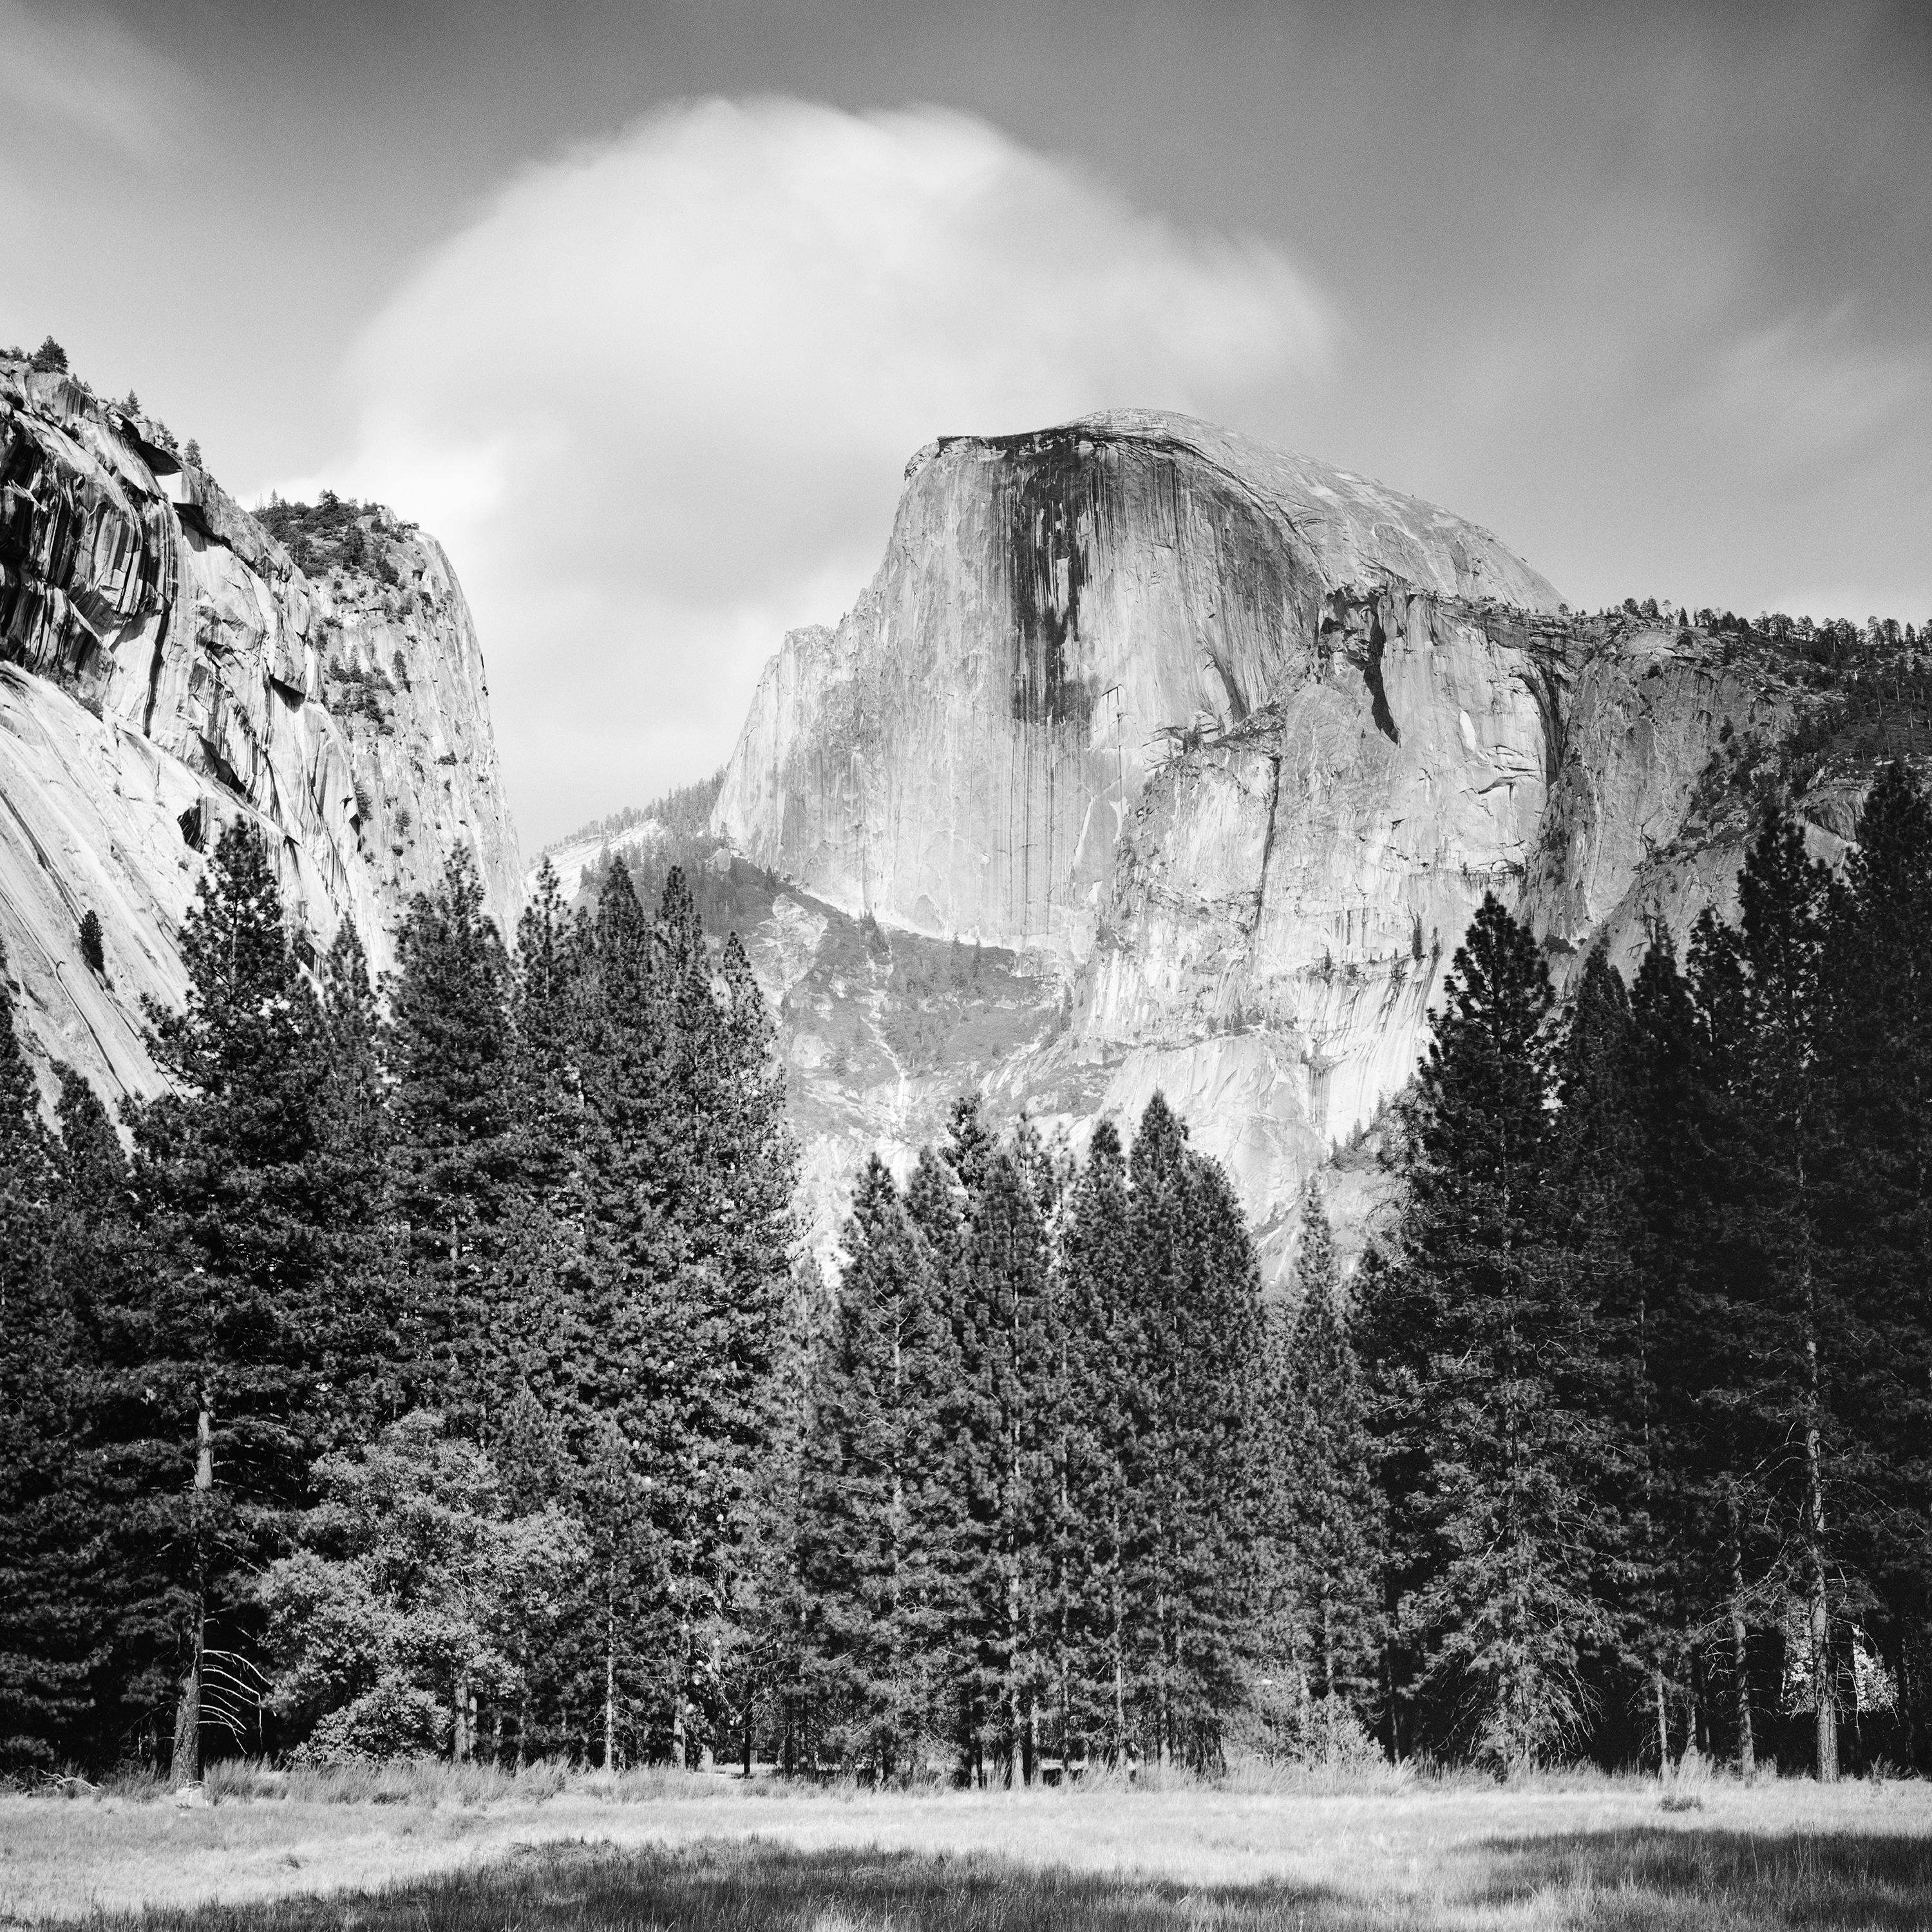 Black and White Fine Art landscape photography. Half dome with big cloud, with forest and shadow from a tree, National Park, California, USA. Archival pigment ink print, edition of 7. Signed, titled, dated and numbered by artist. Certificate of